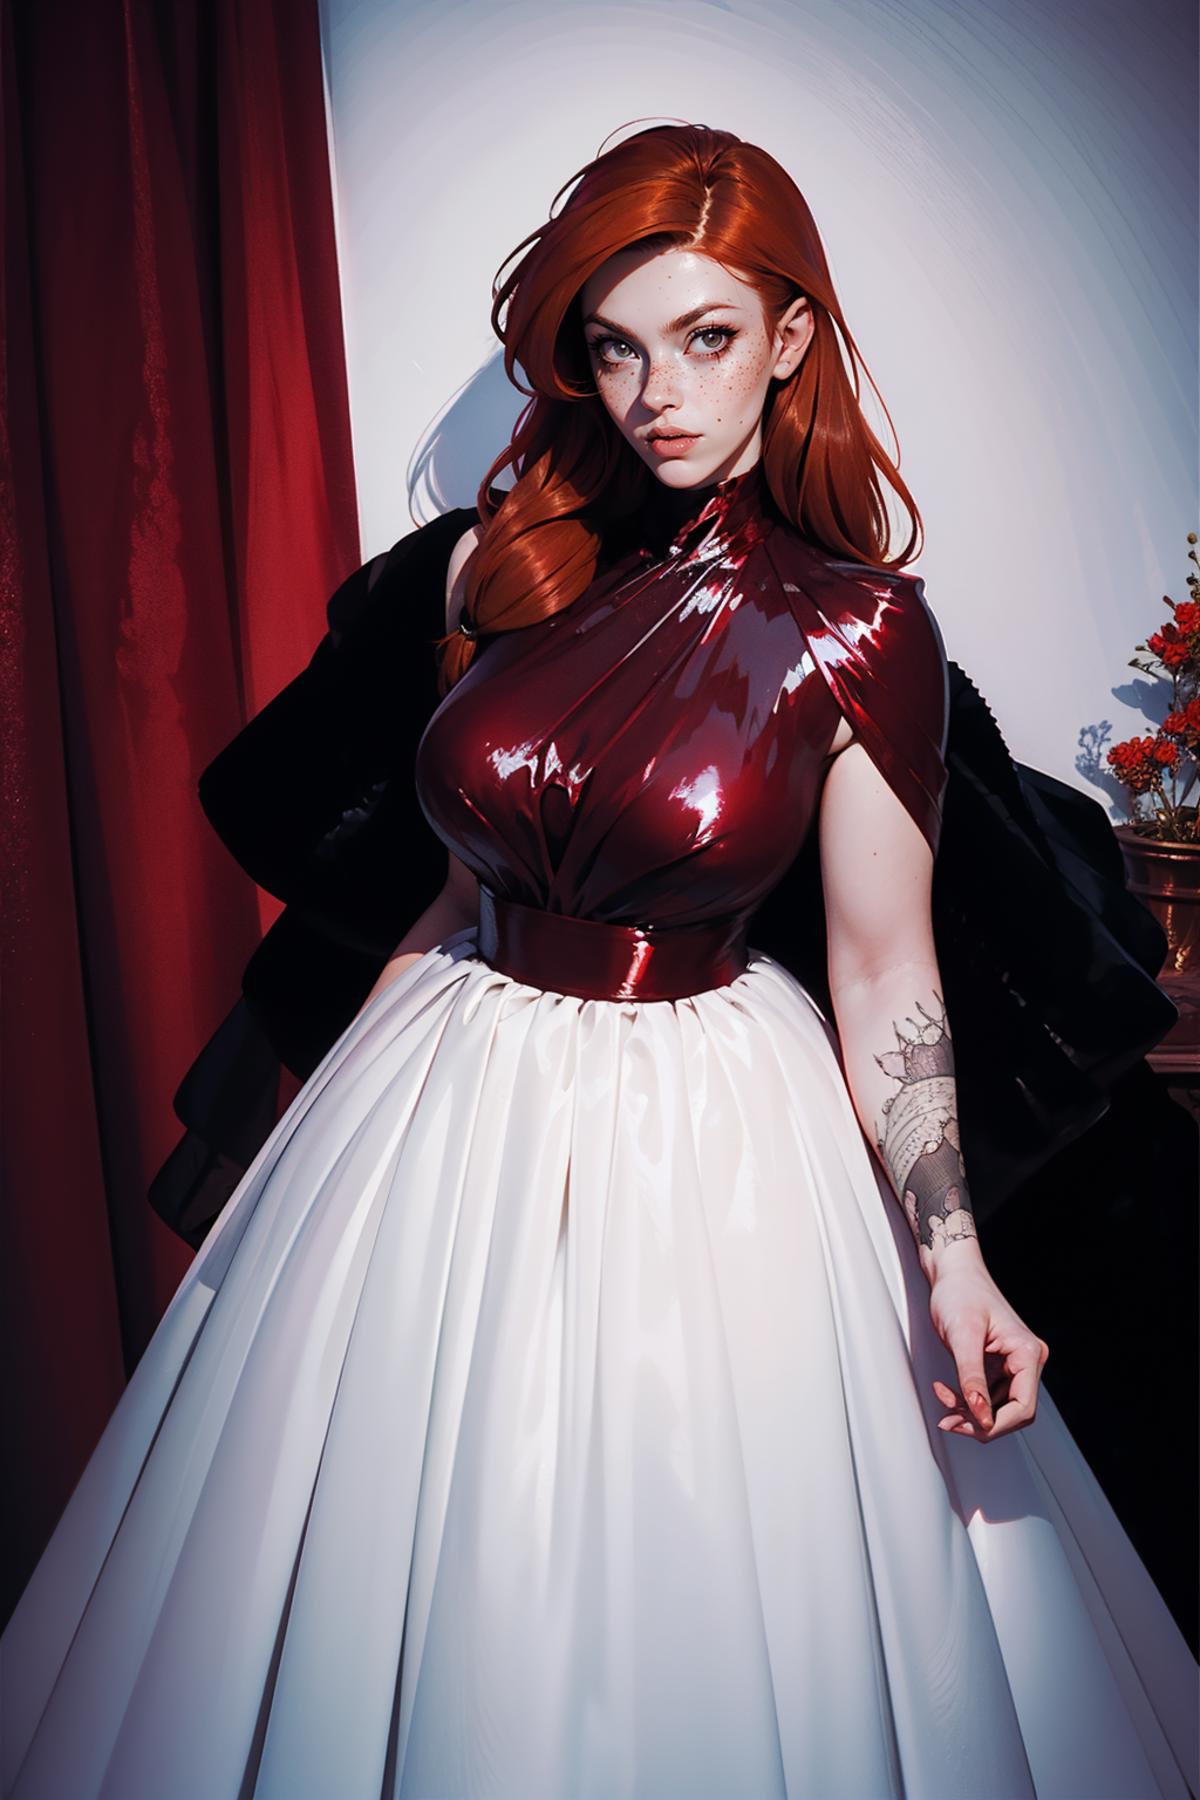 Red Rubber Dress image by freckledvixon